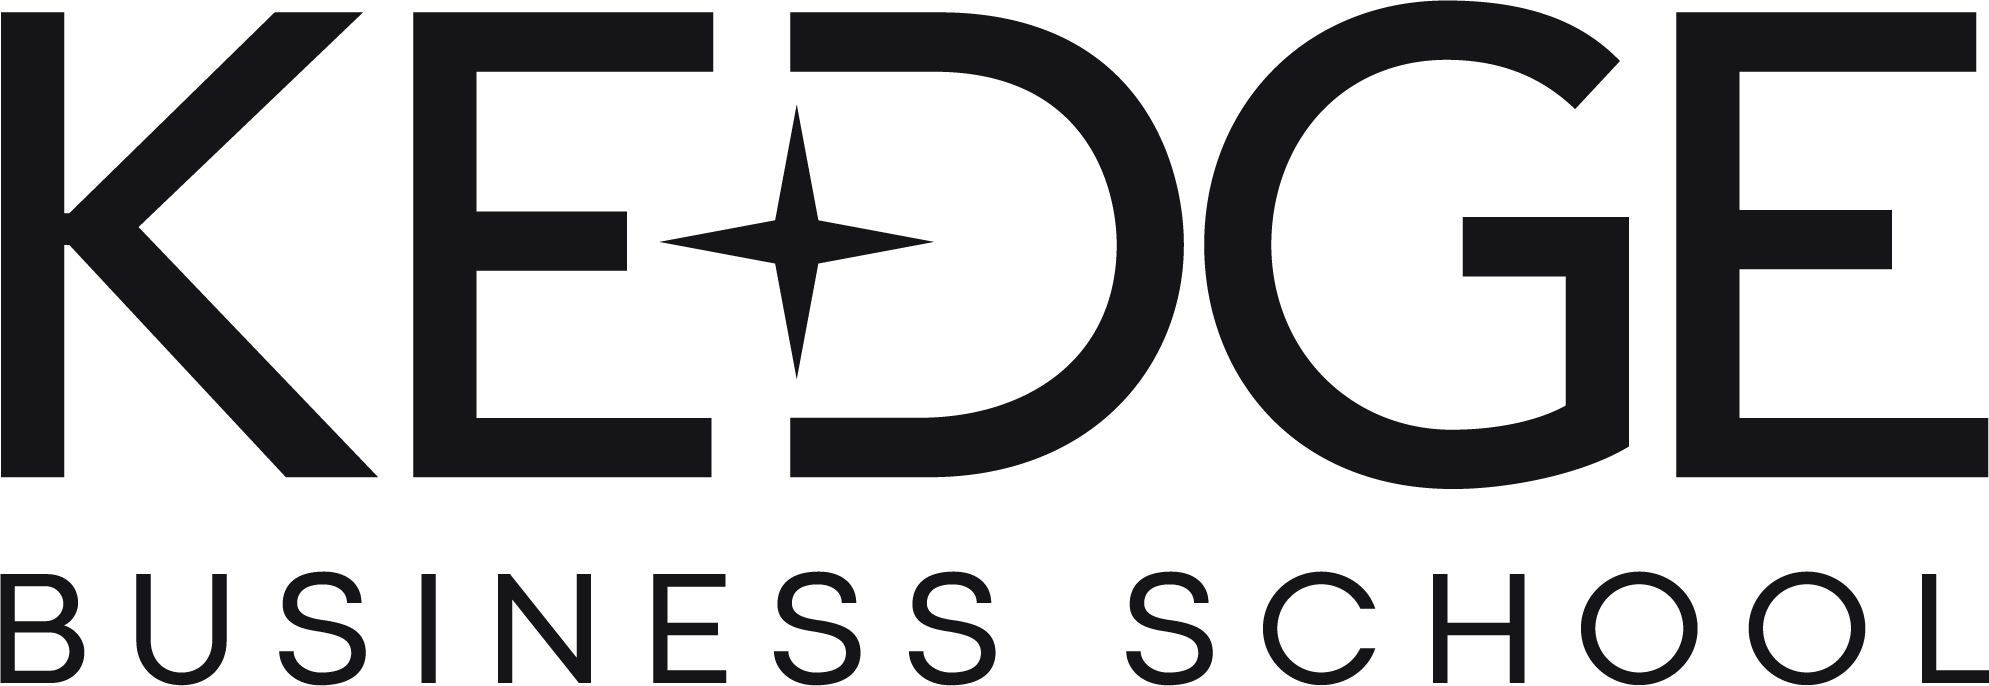 associated with ide business school